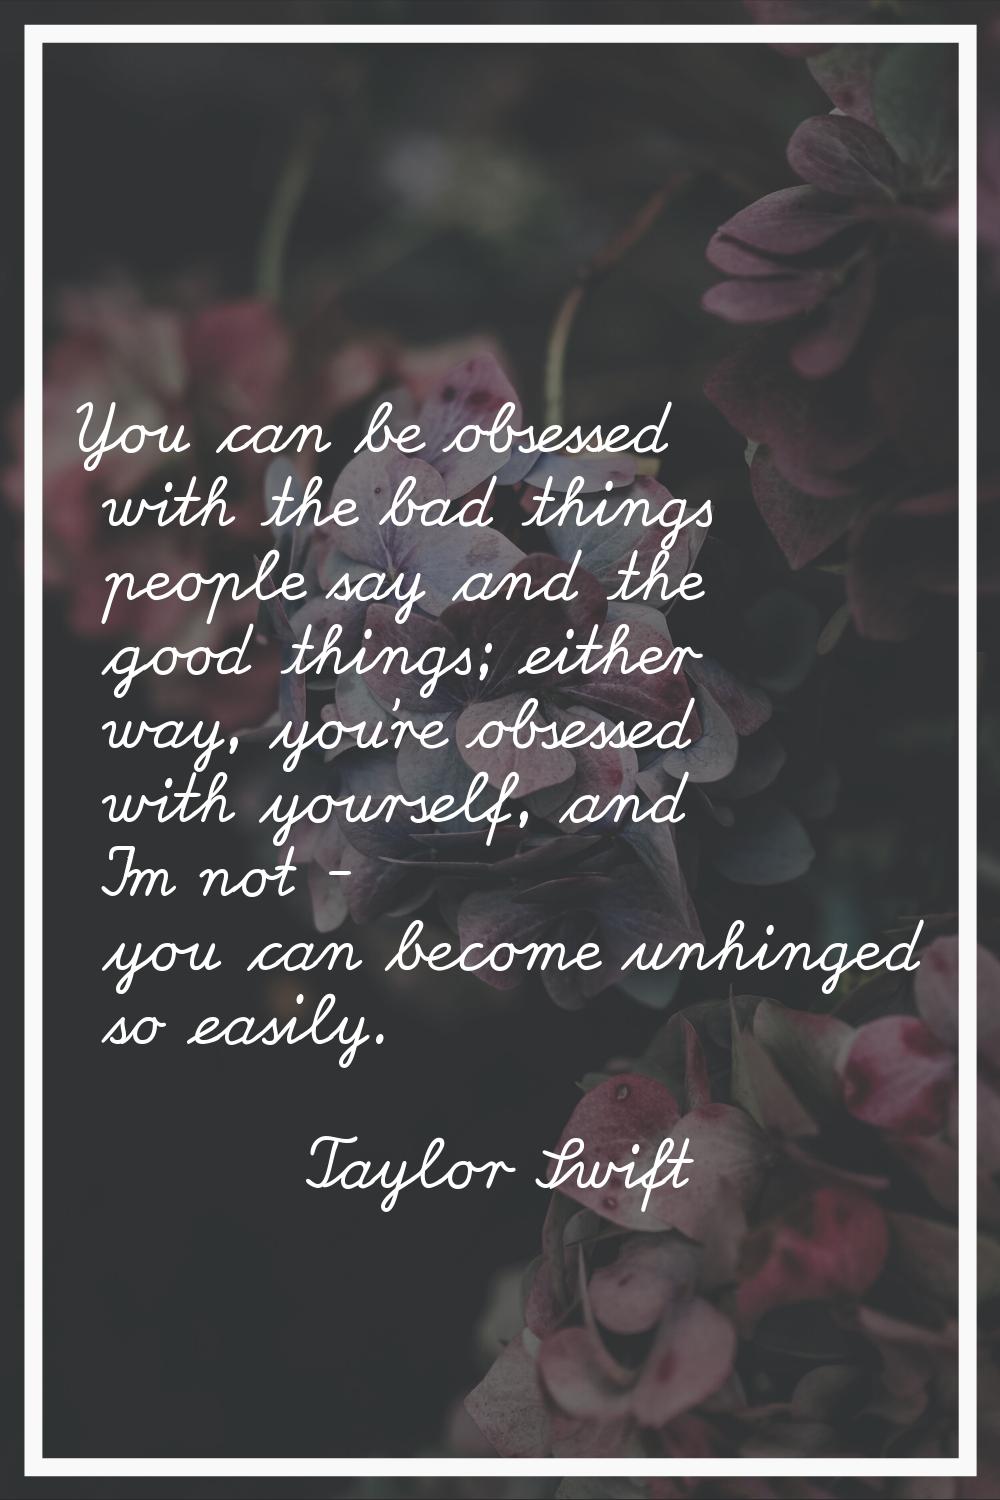 You can be obsessed with the bad things people say and the good things; either way, you're obsessed